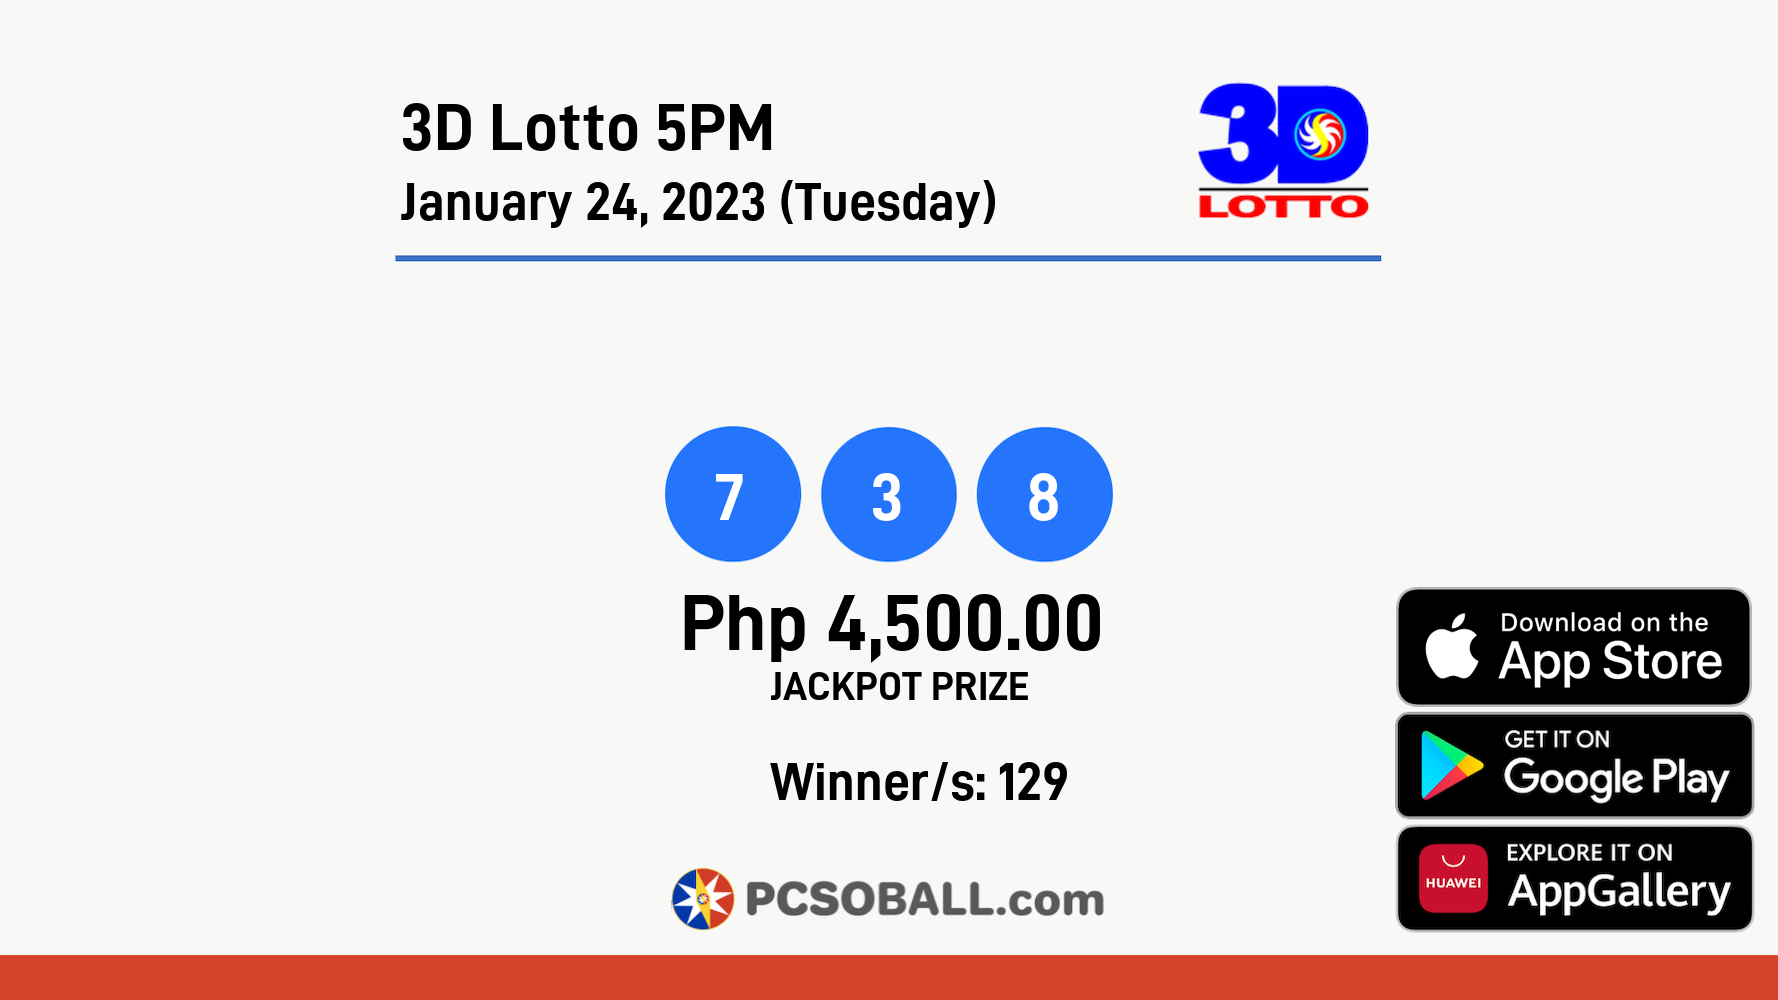 3D Lotto 5PM January 24, 2023 (Tuesday) Result